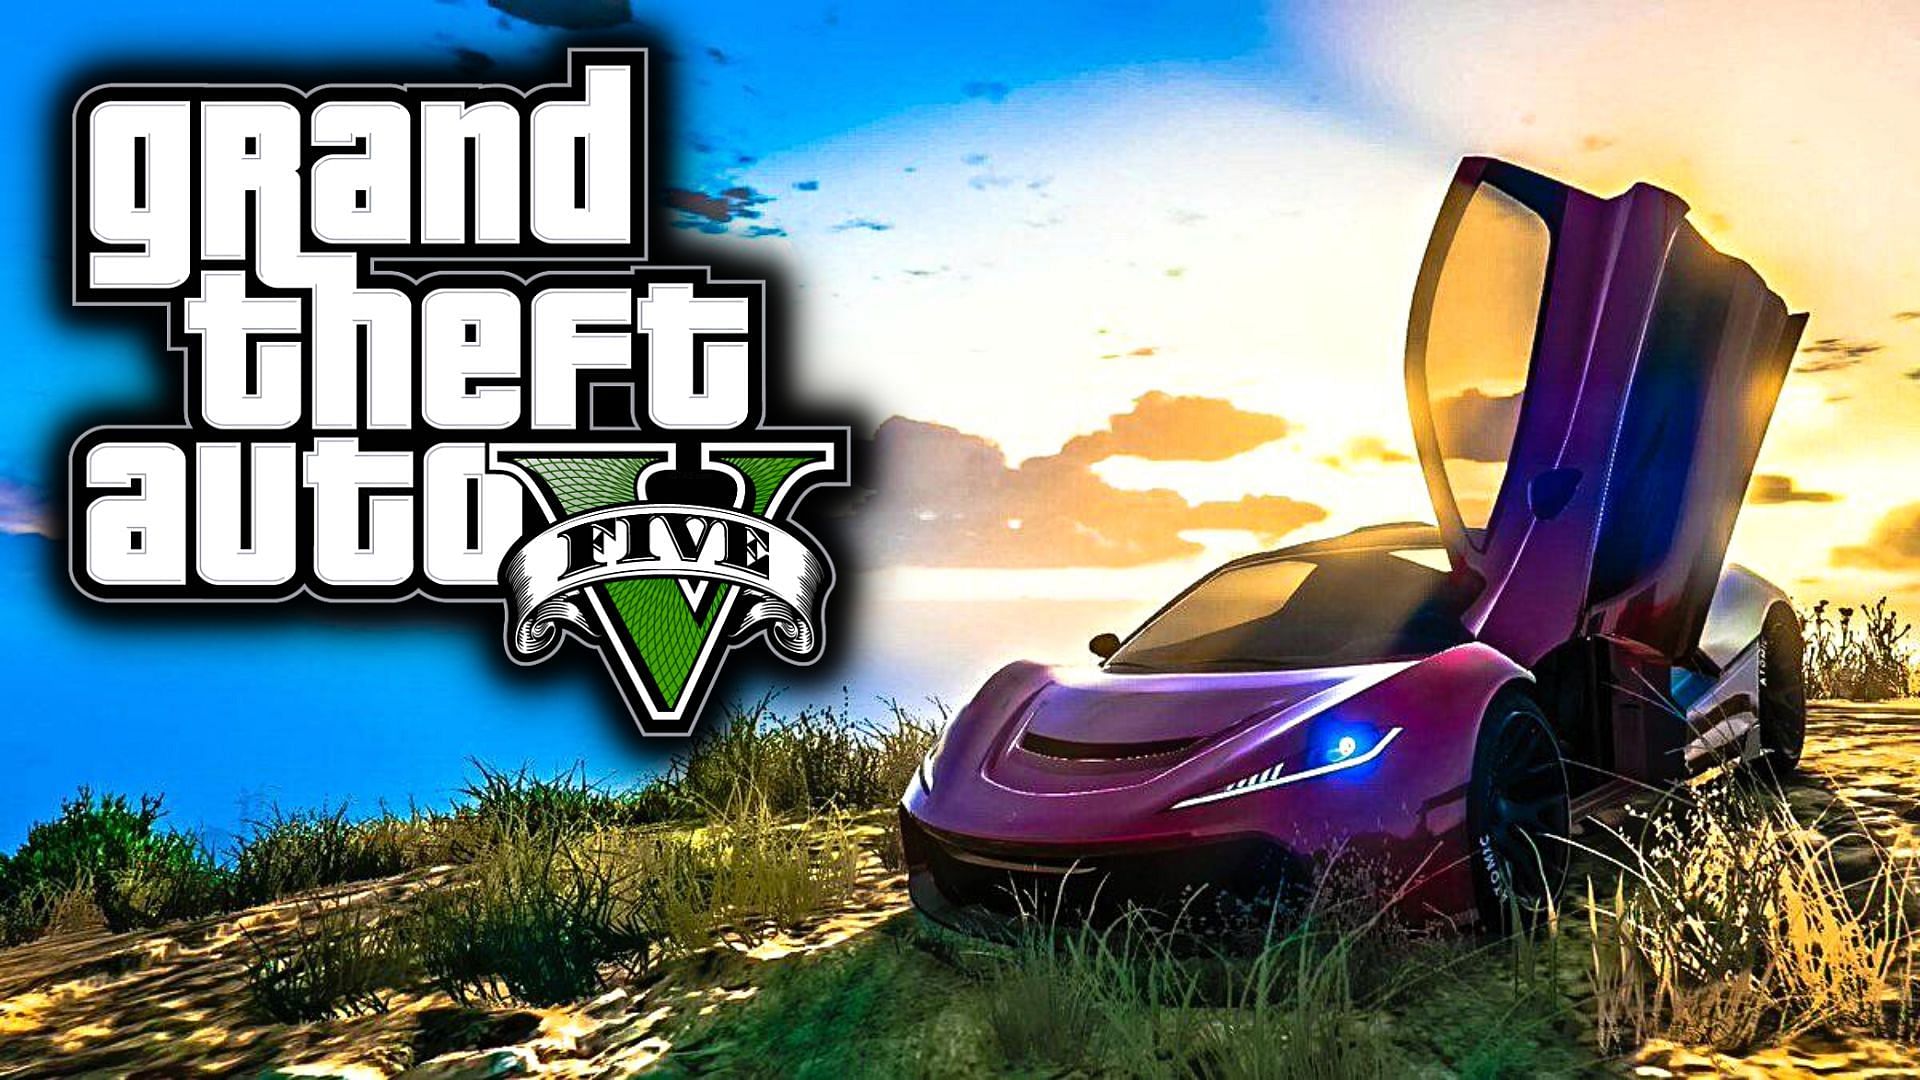 Which Is The Fastest Car In Gta 5 Story Mode In 2023?